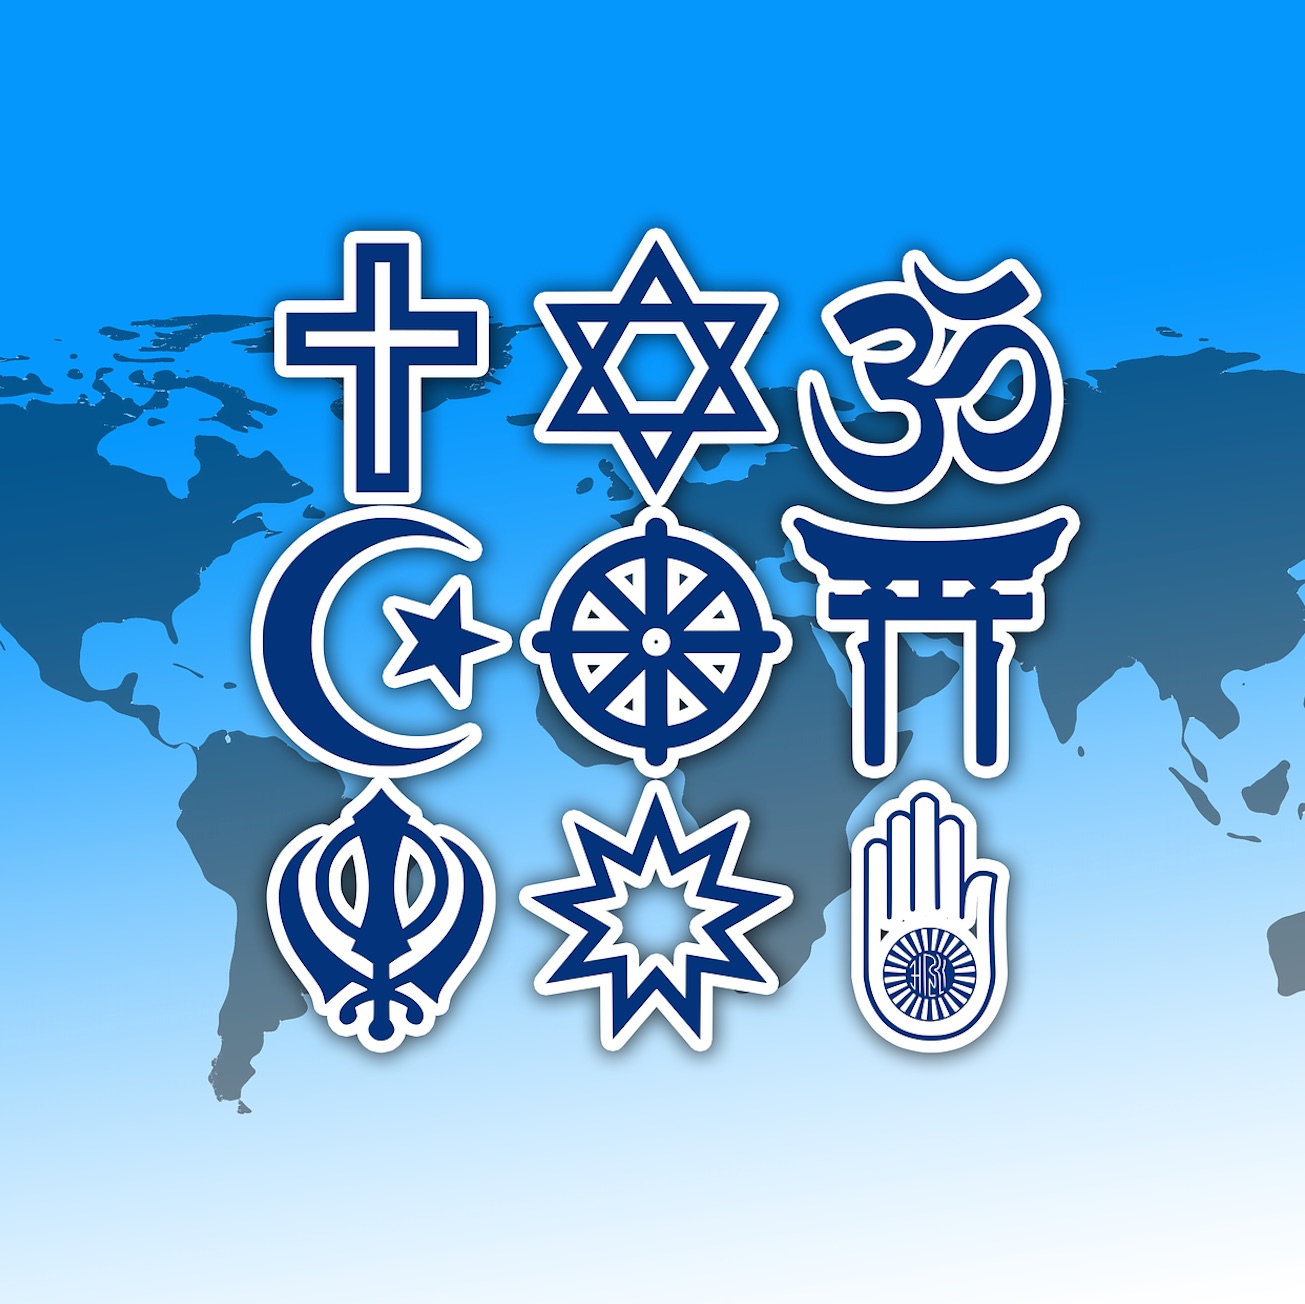 World religion symbols for kids and students